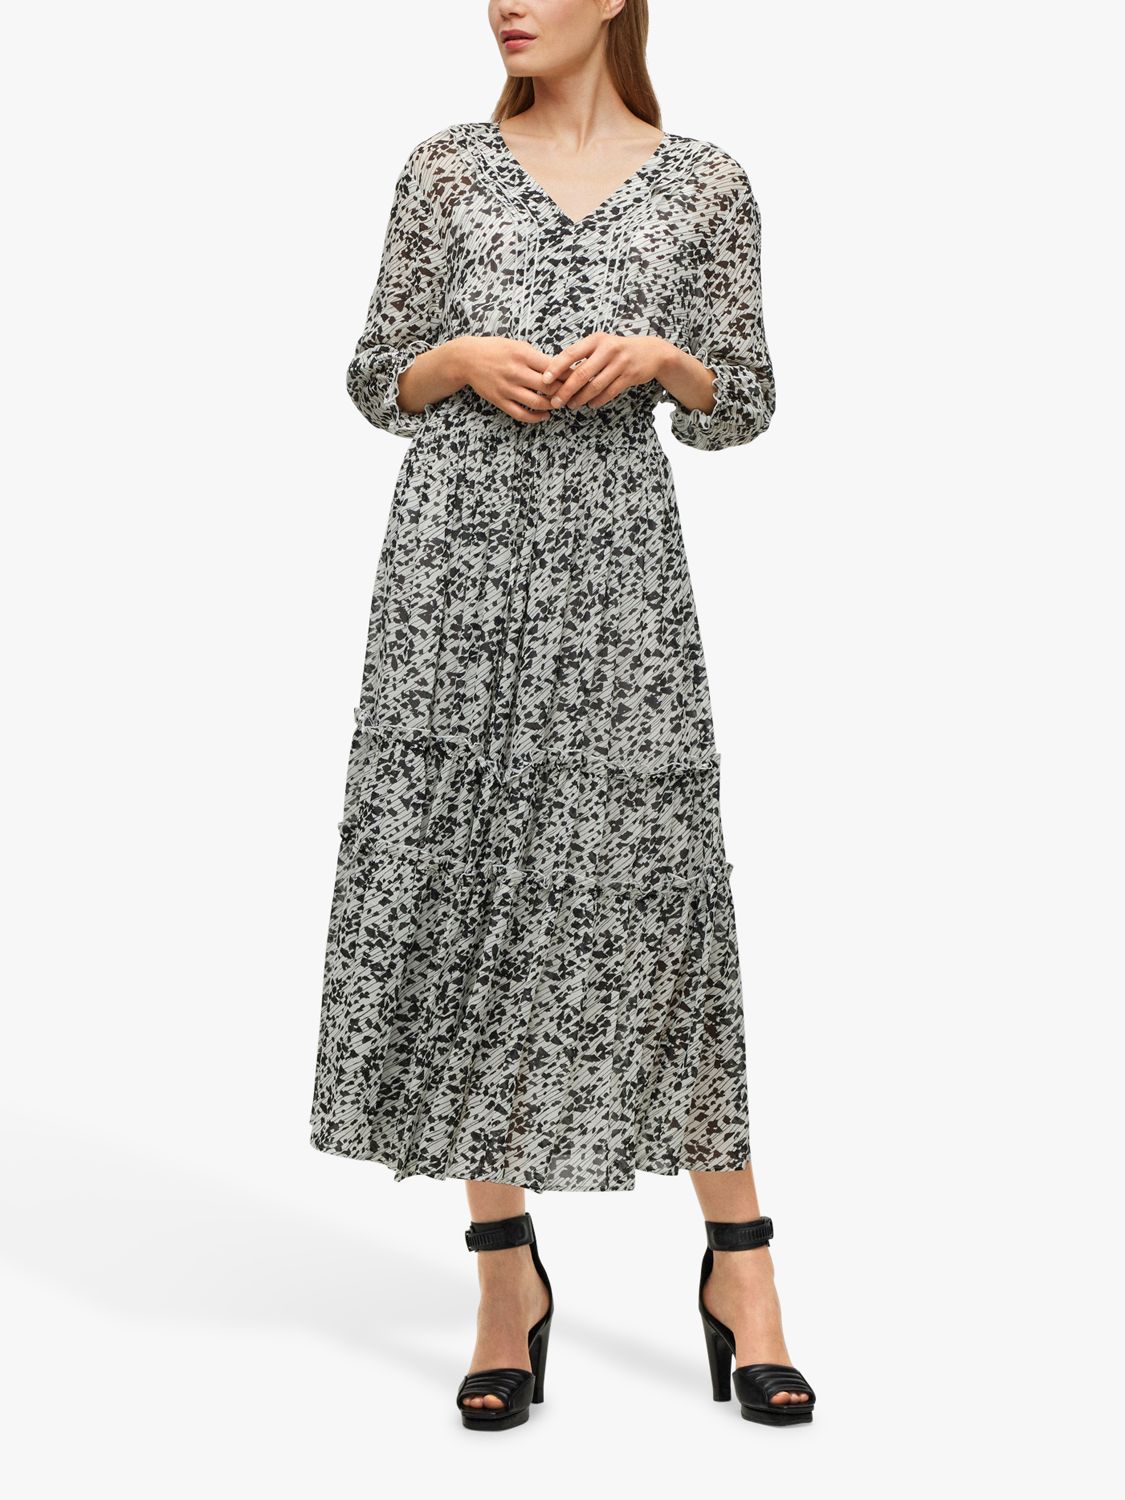 HUGO BOSS Dellima Tiered Dress, Open Miscellaneous at John Lewis & Partners